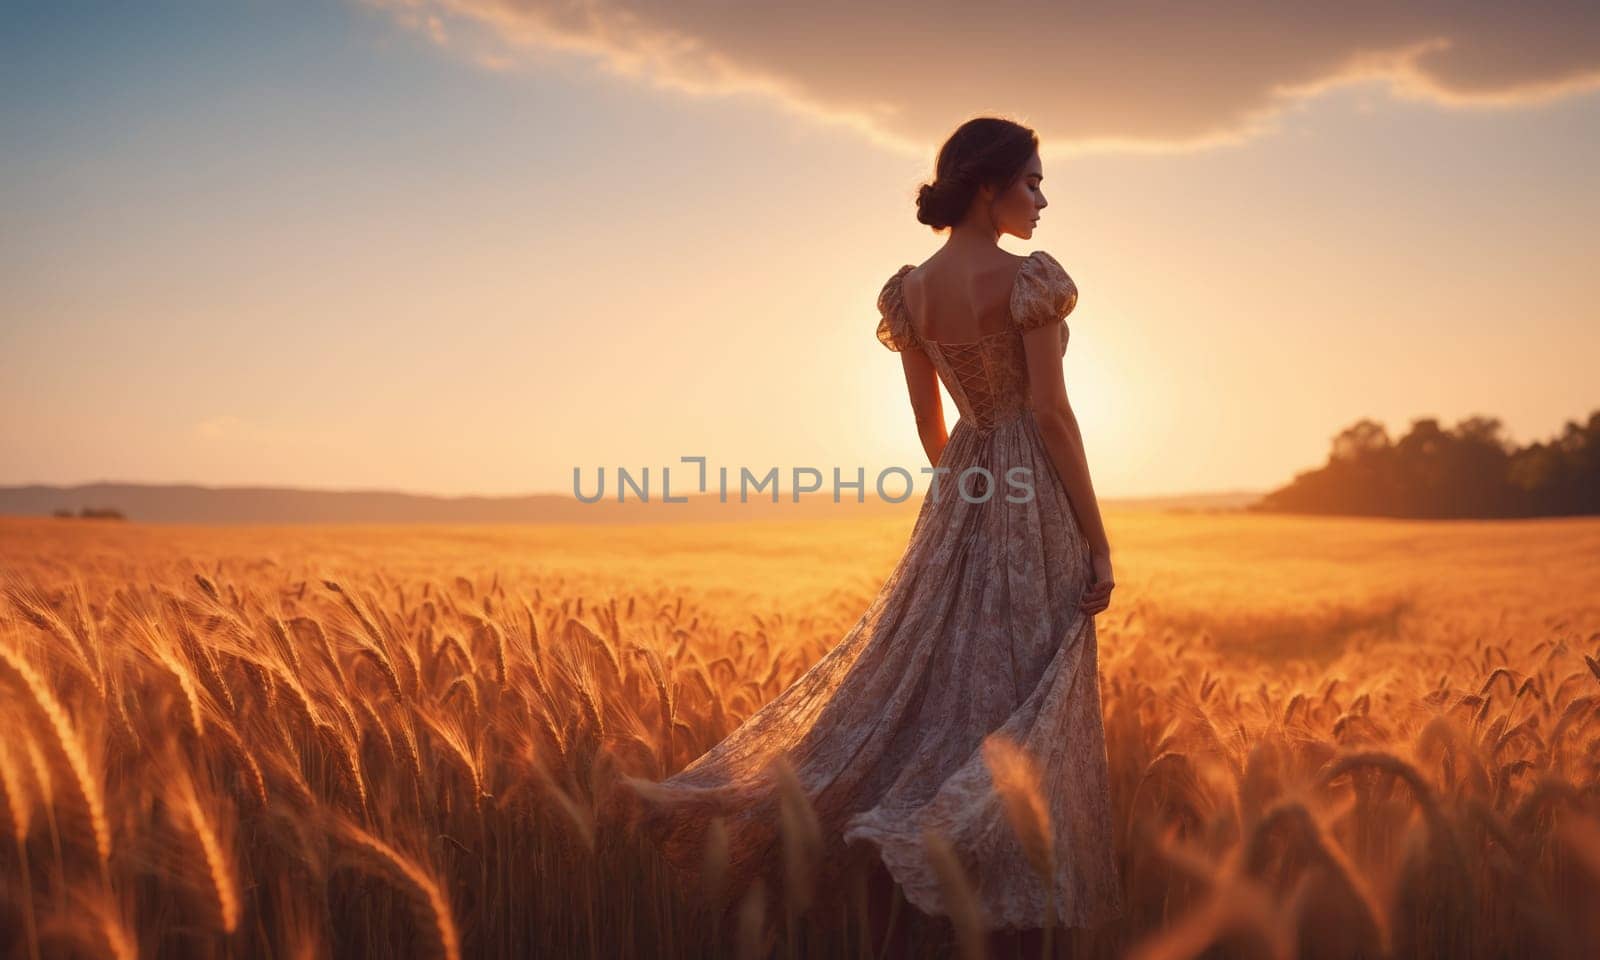 A woman in a white dress stands in a wheat field at sunset, surrounded by the golden sky and clouds. She looks happy, blending into the natural landscape